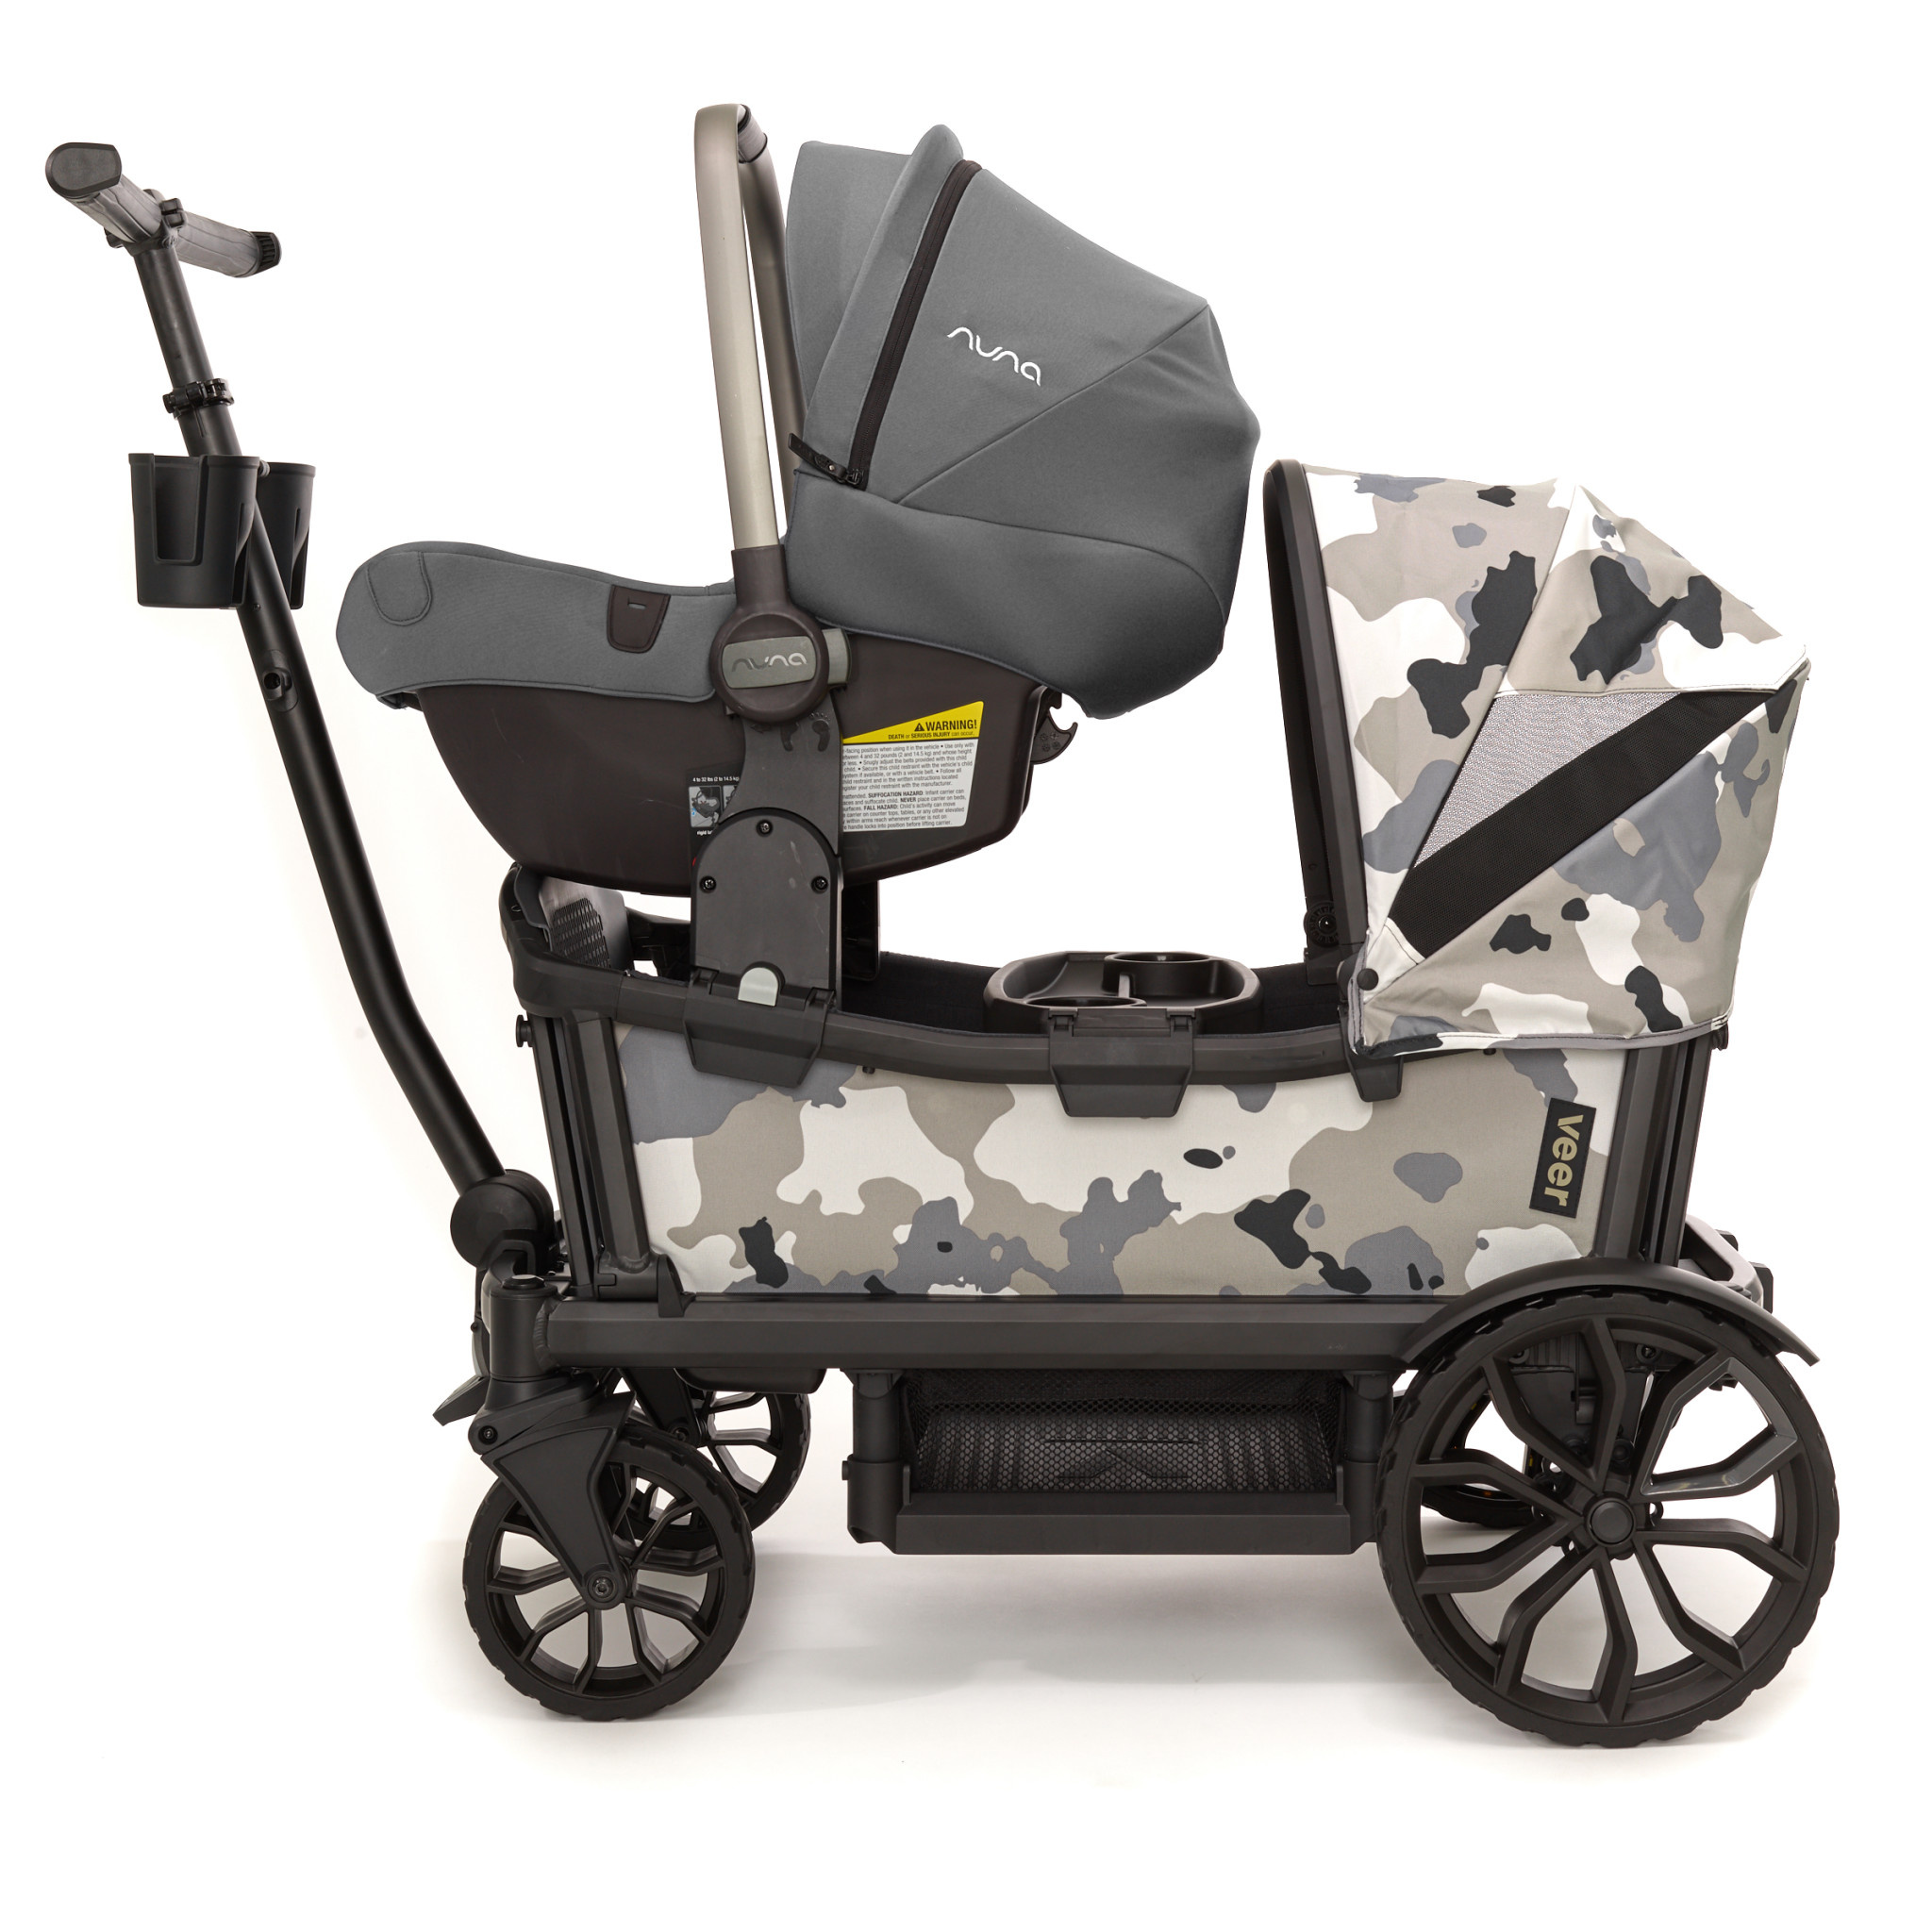 Veer - Cruiser XL Comfort Seat for Toddlers